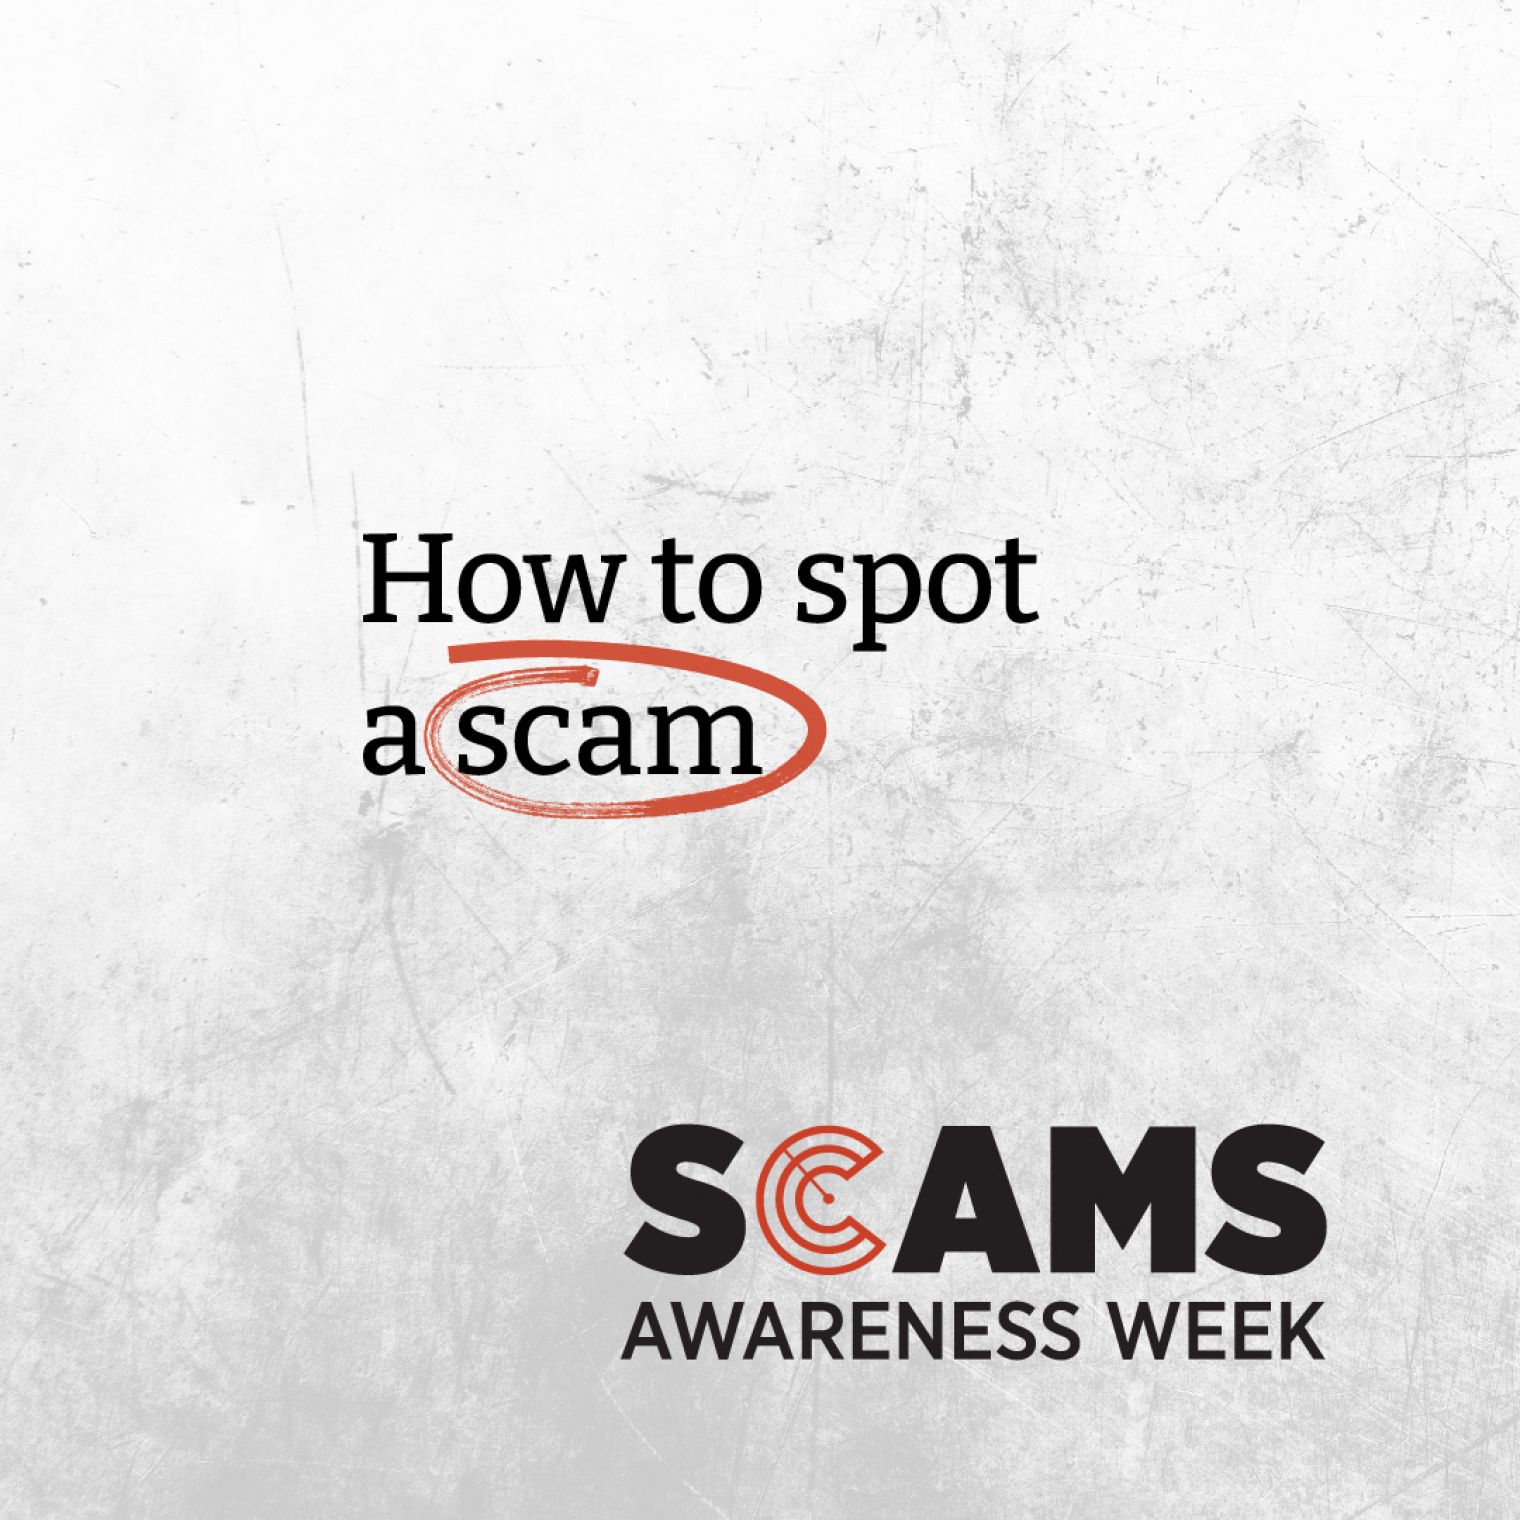 Scams Awareness Week 2022 - How to Spot a Scam